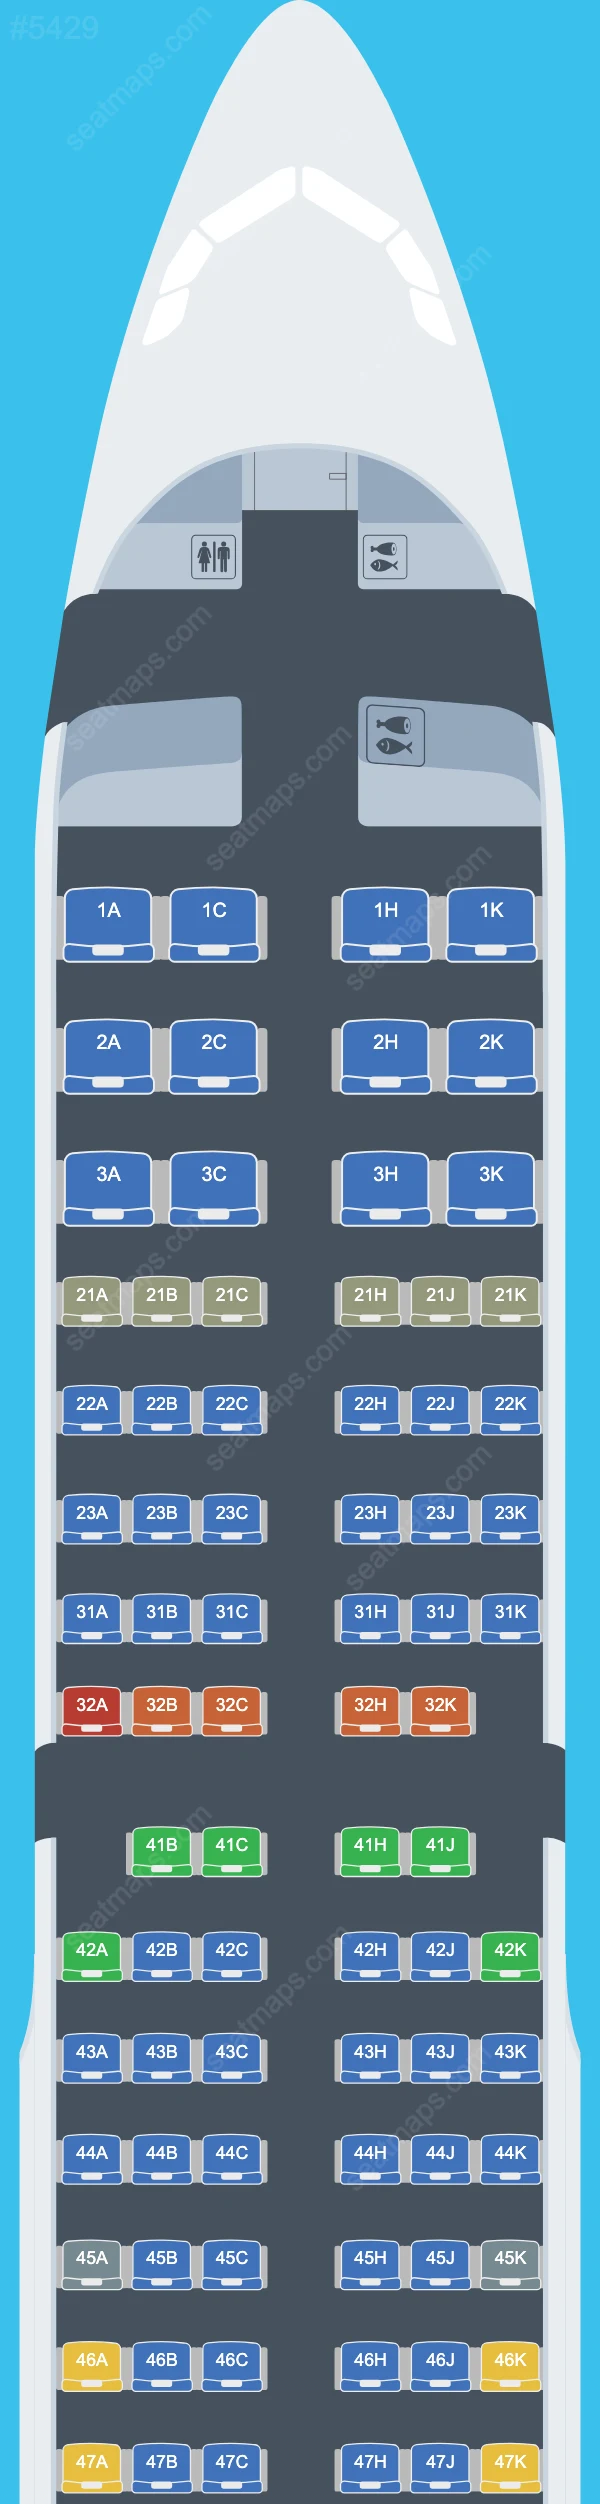 Philippine Airlines (PAL) Airbus A321-200 V.1 seatmap mobile preview